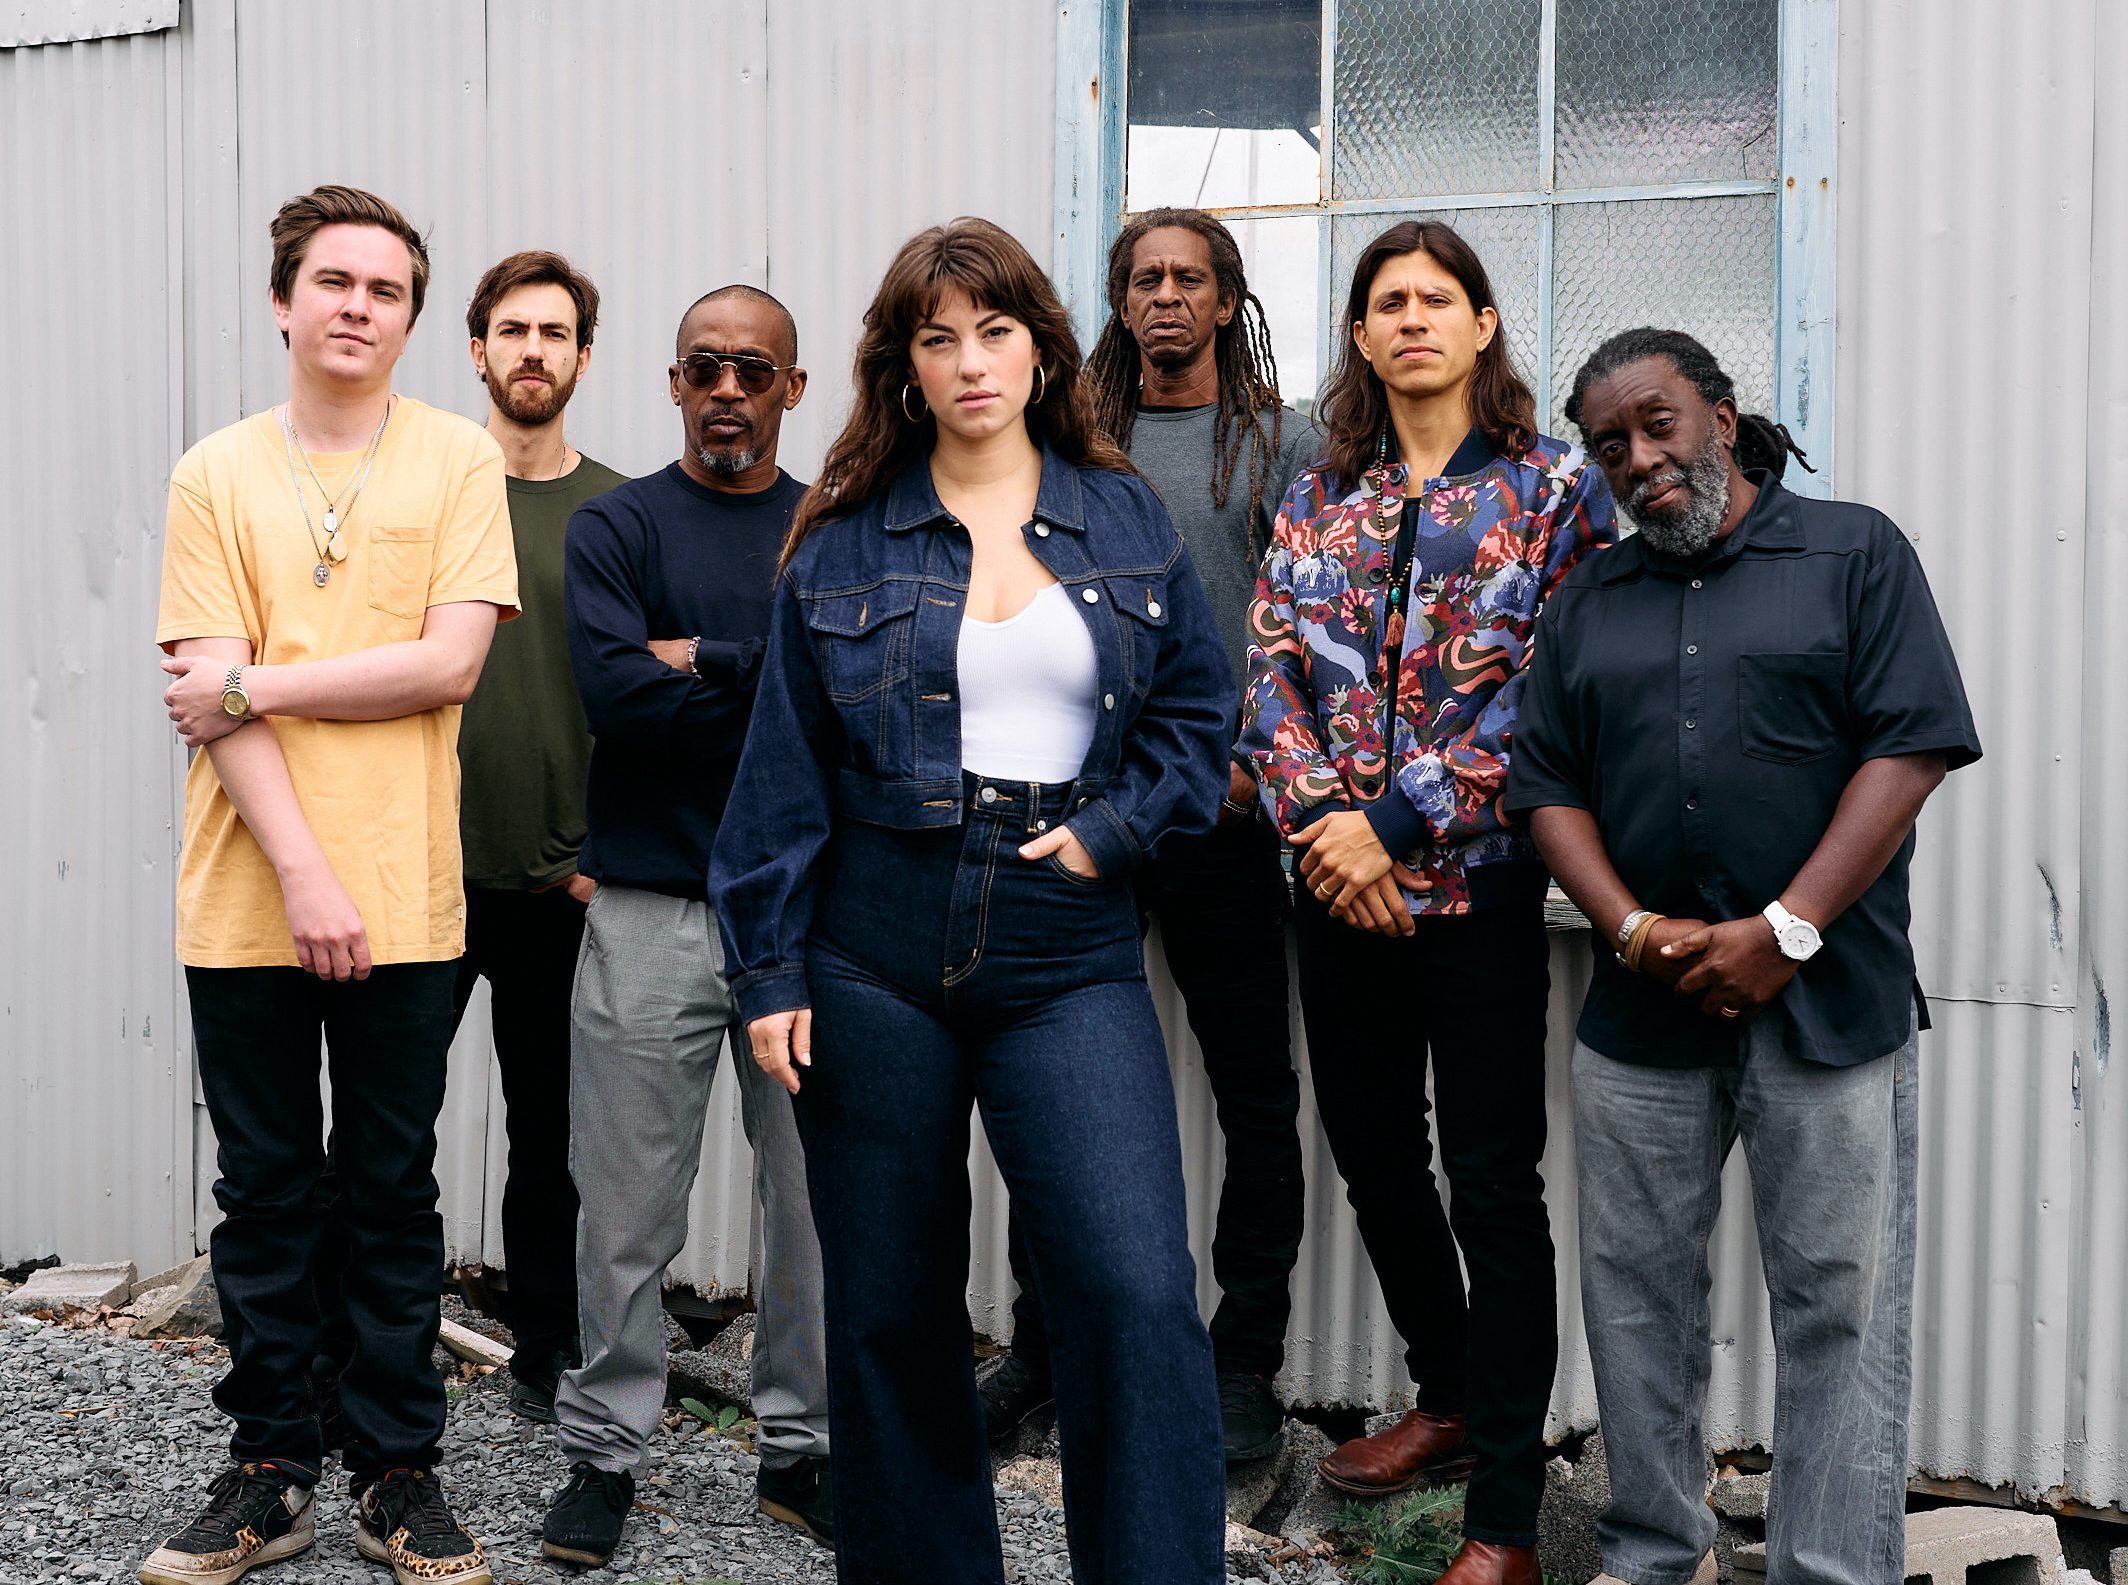 SunDub & Upstate Reggae Posse looking serious at the camera in front of a metal building